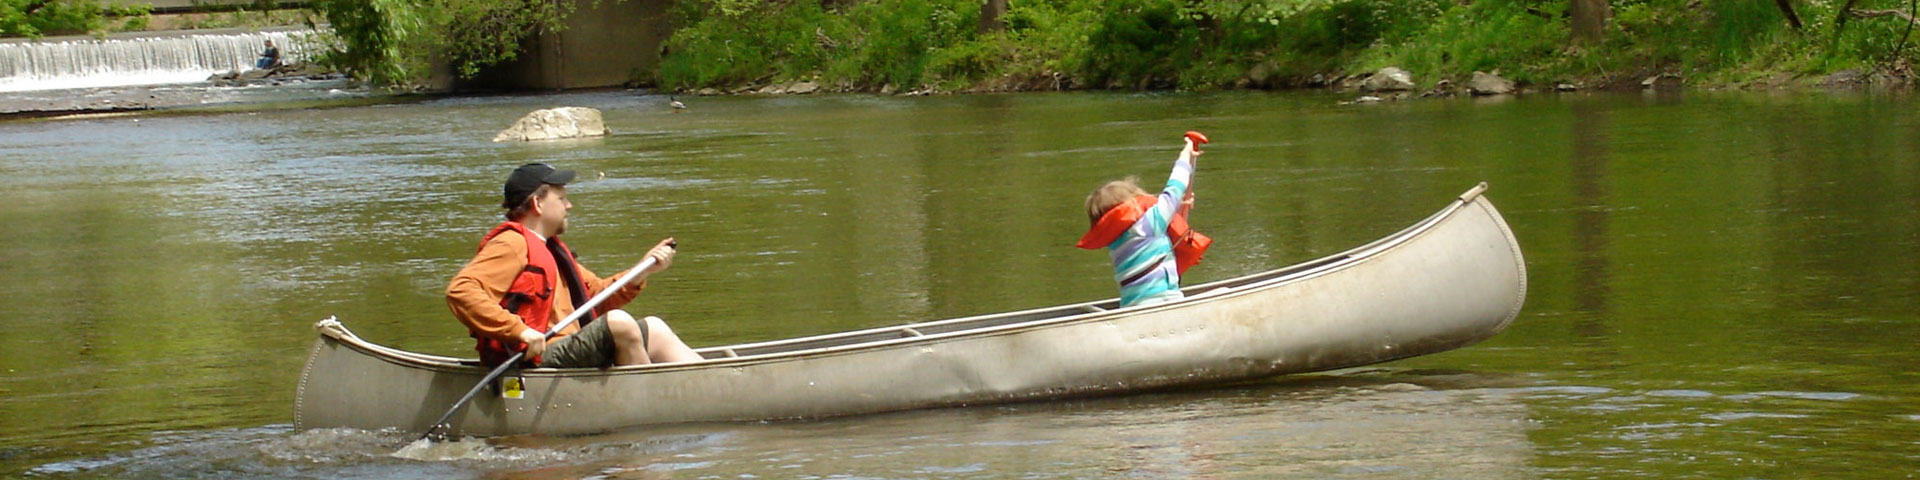 An adult male and a young girl paddle in a canoe on a creek.